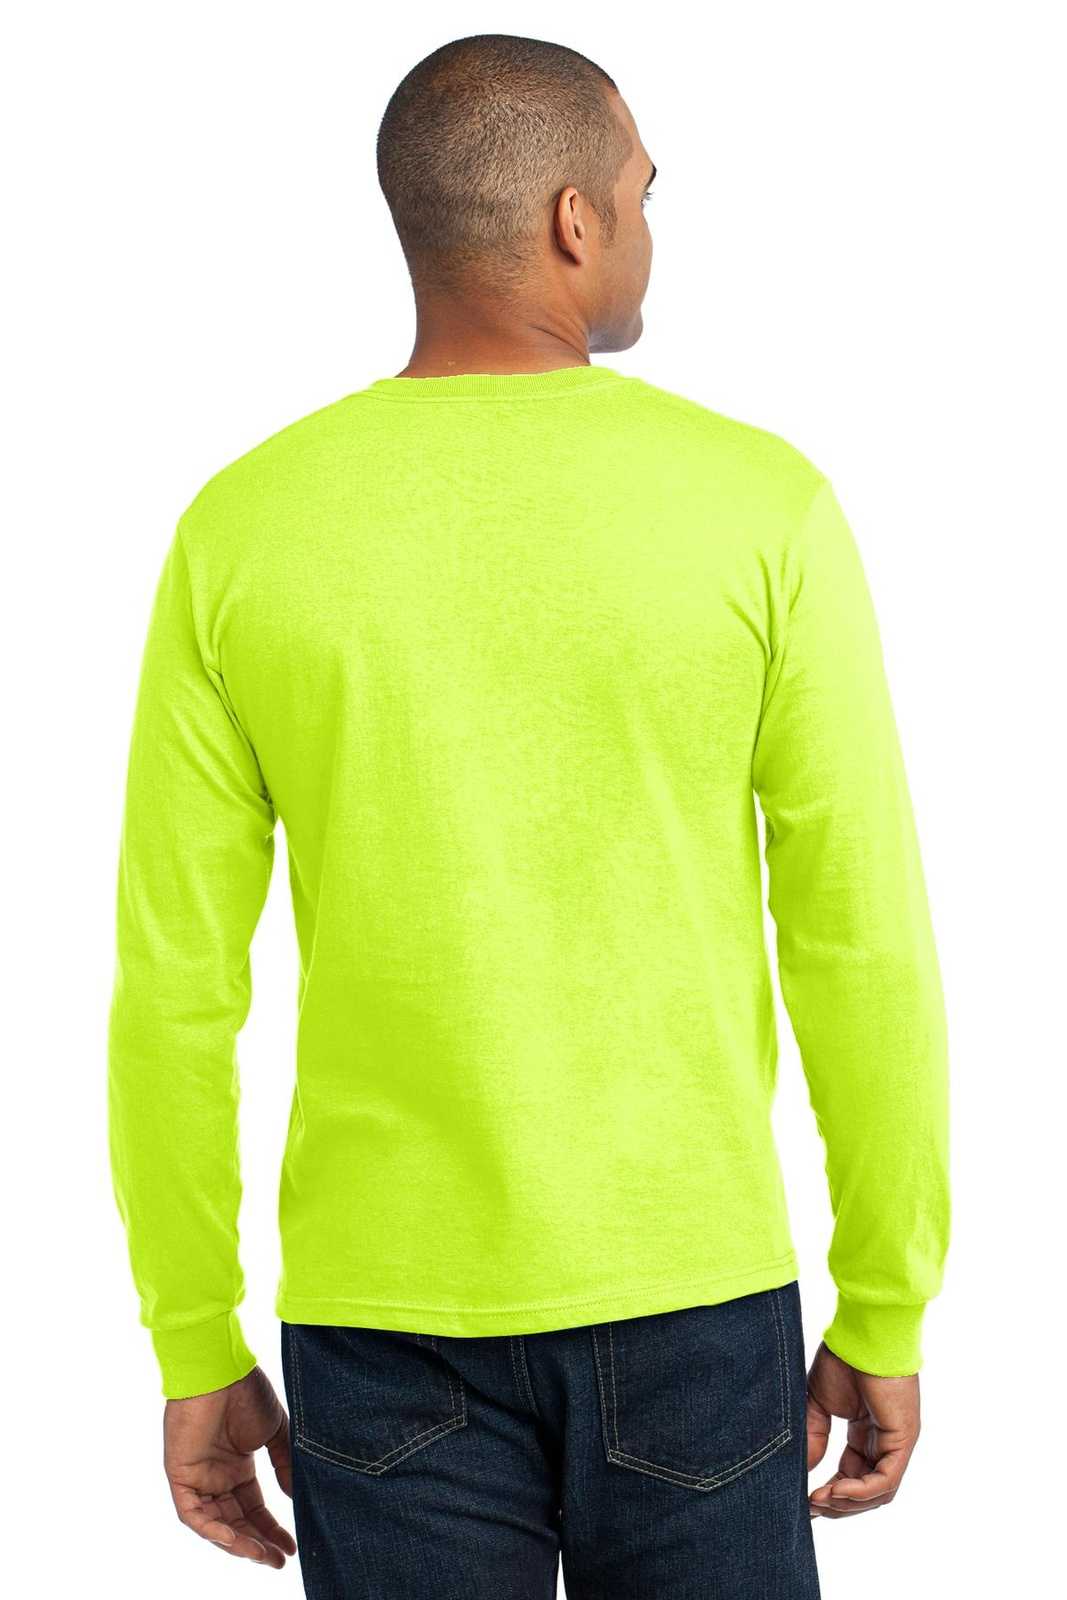 Port &amp; Company USA100LS Long Sleeve All-American Tee - Safety Green - HIT a Double - 2